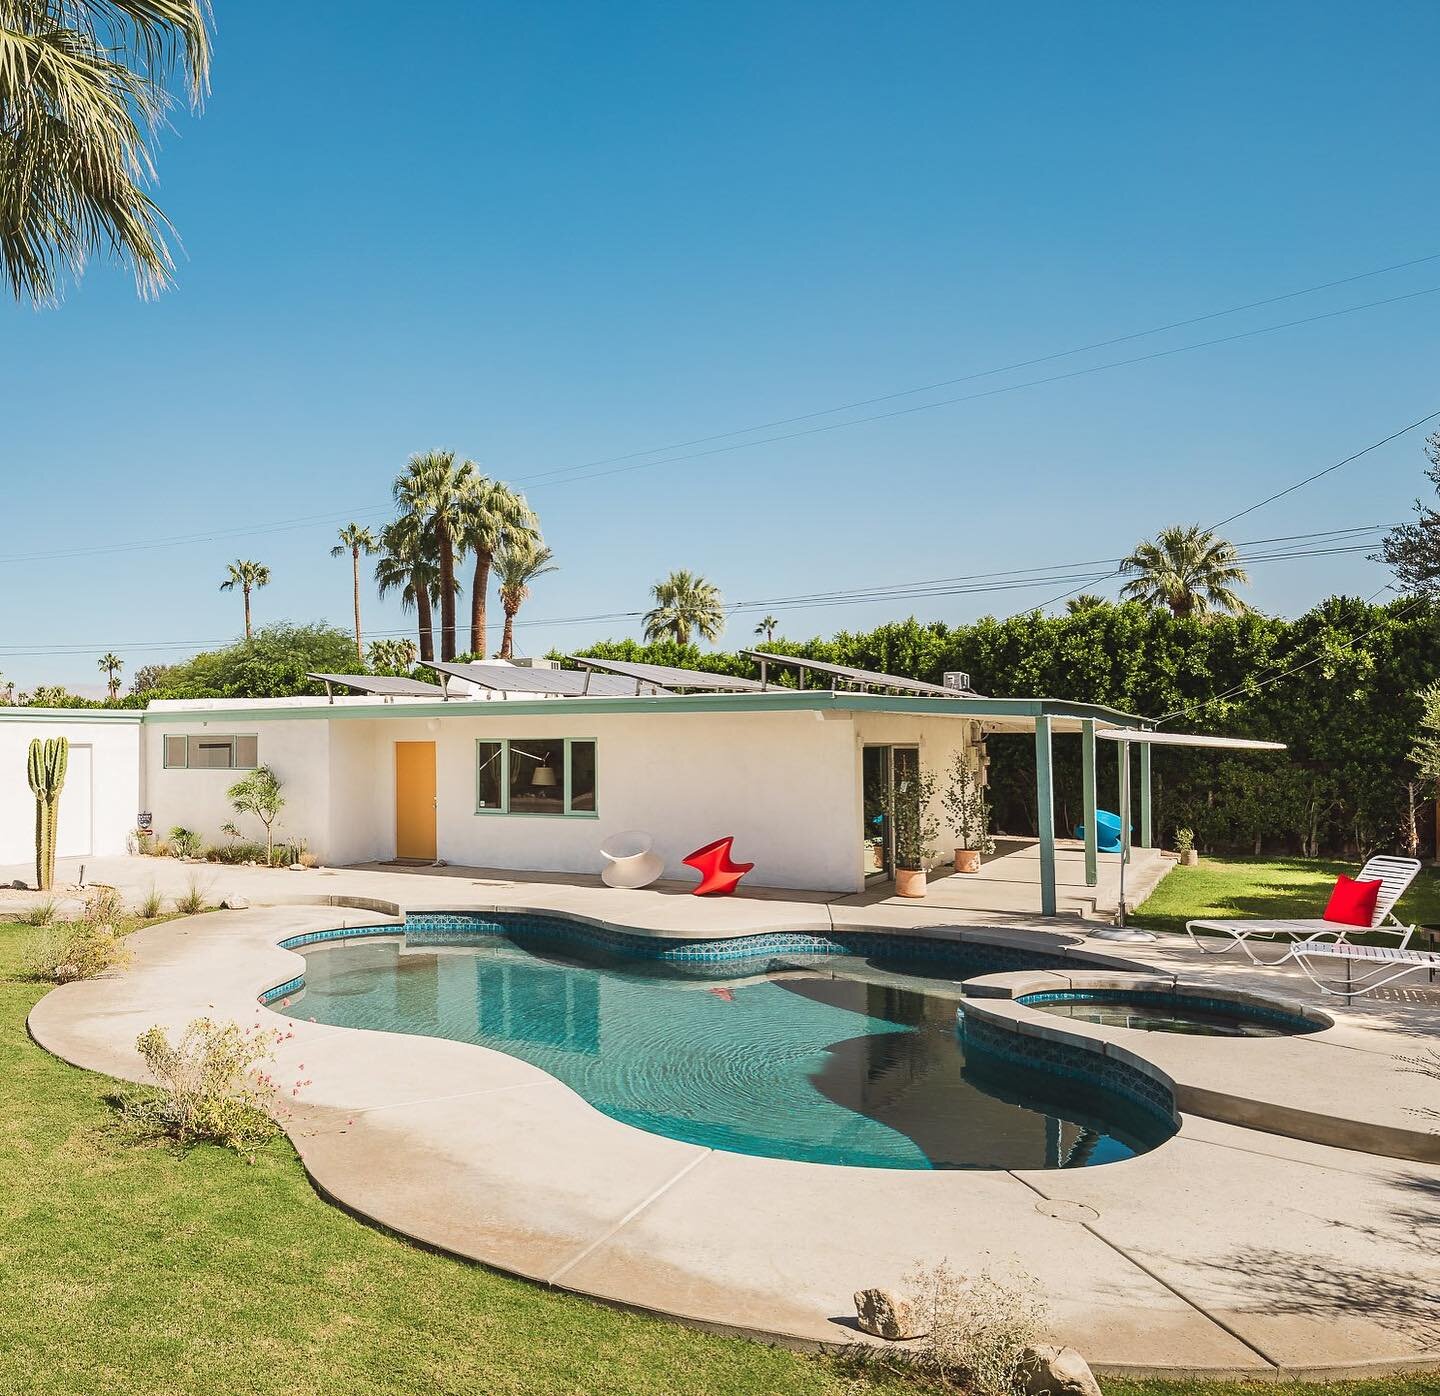 The Bel Vista House, by Albert Frey, circa 1946.

A rare and early single family home design by one of the most innovative architects of the American modern movement. 

The very first subdivision in Palm Springs to feature modern style houses and the